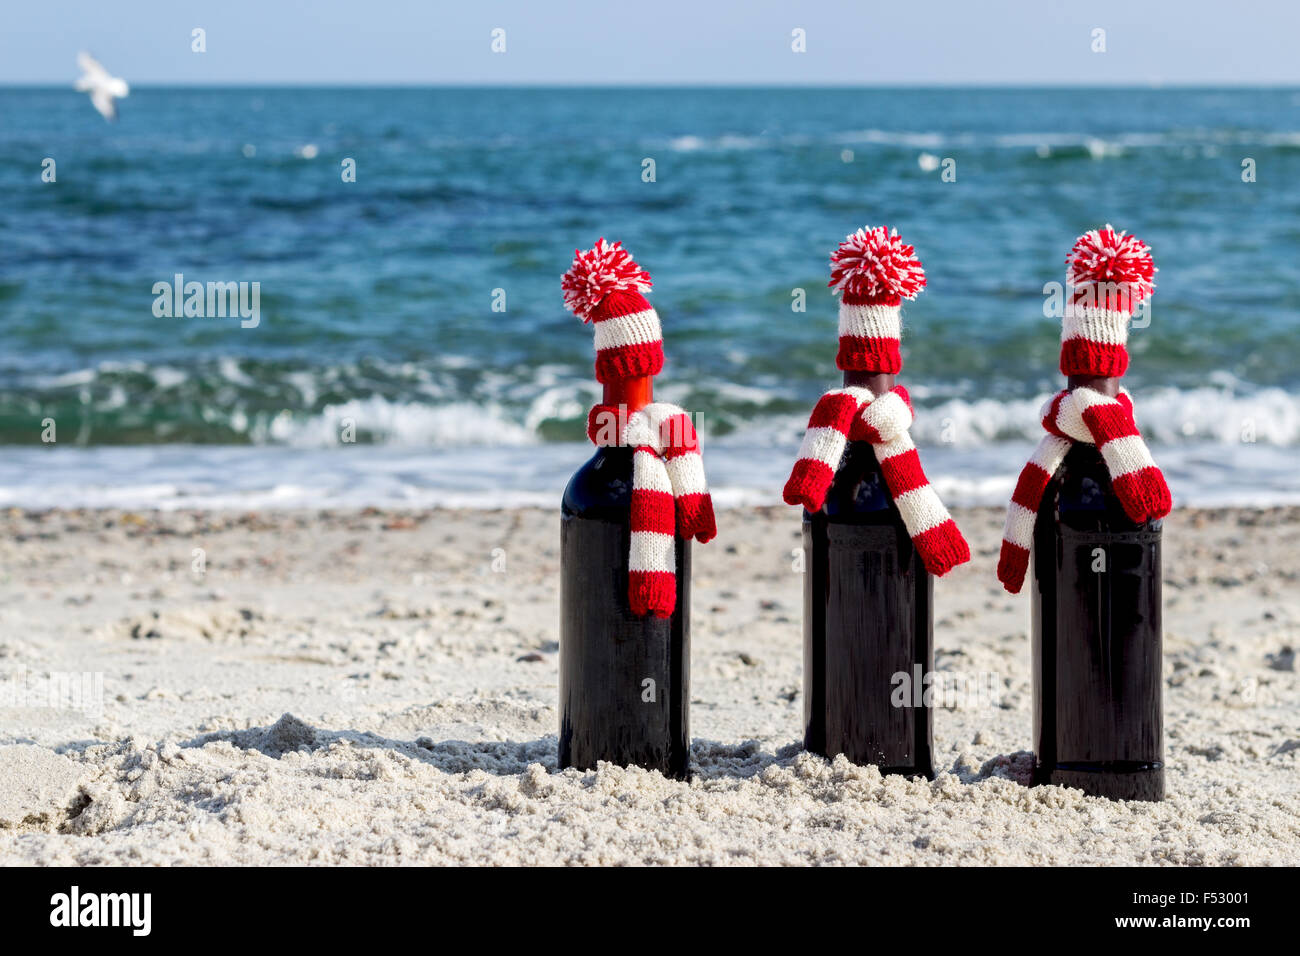 Christmas gifts. Three bottles of wine in knitted hats and scarves on the beach. Selective focus. Stock Photo